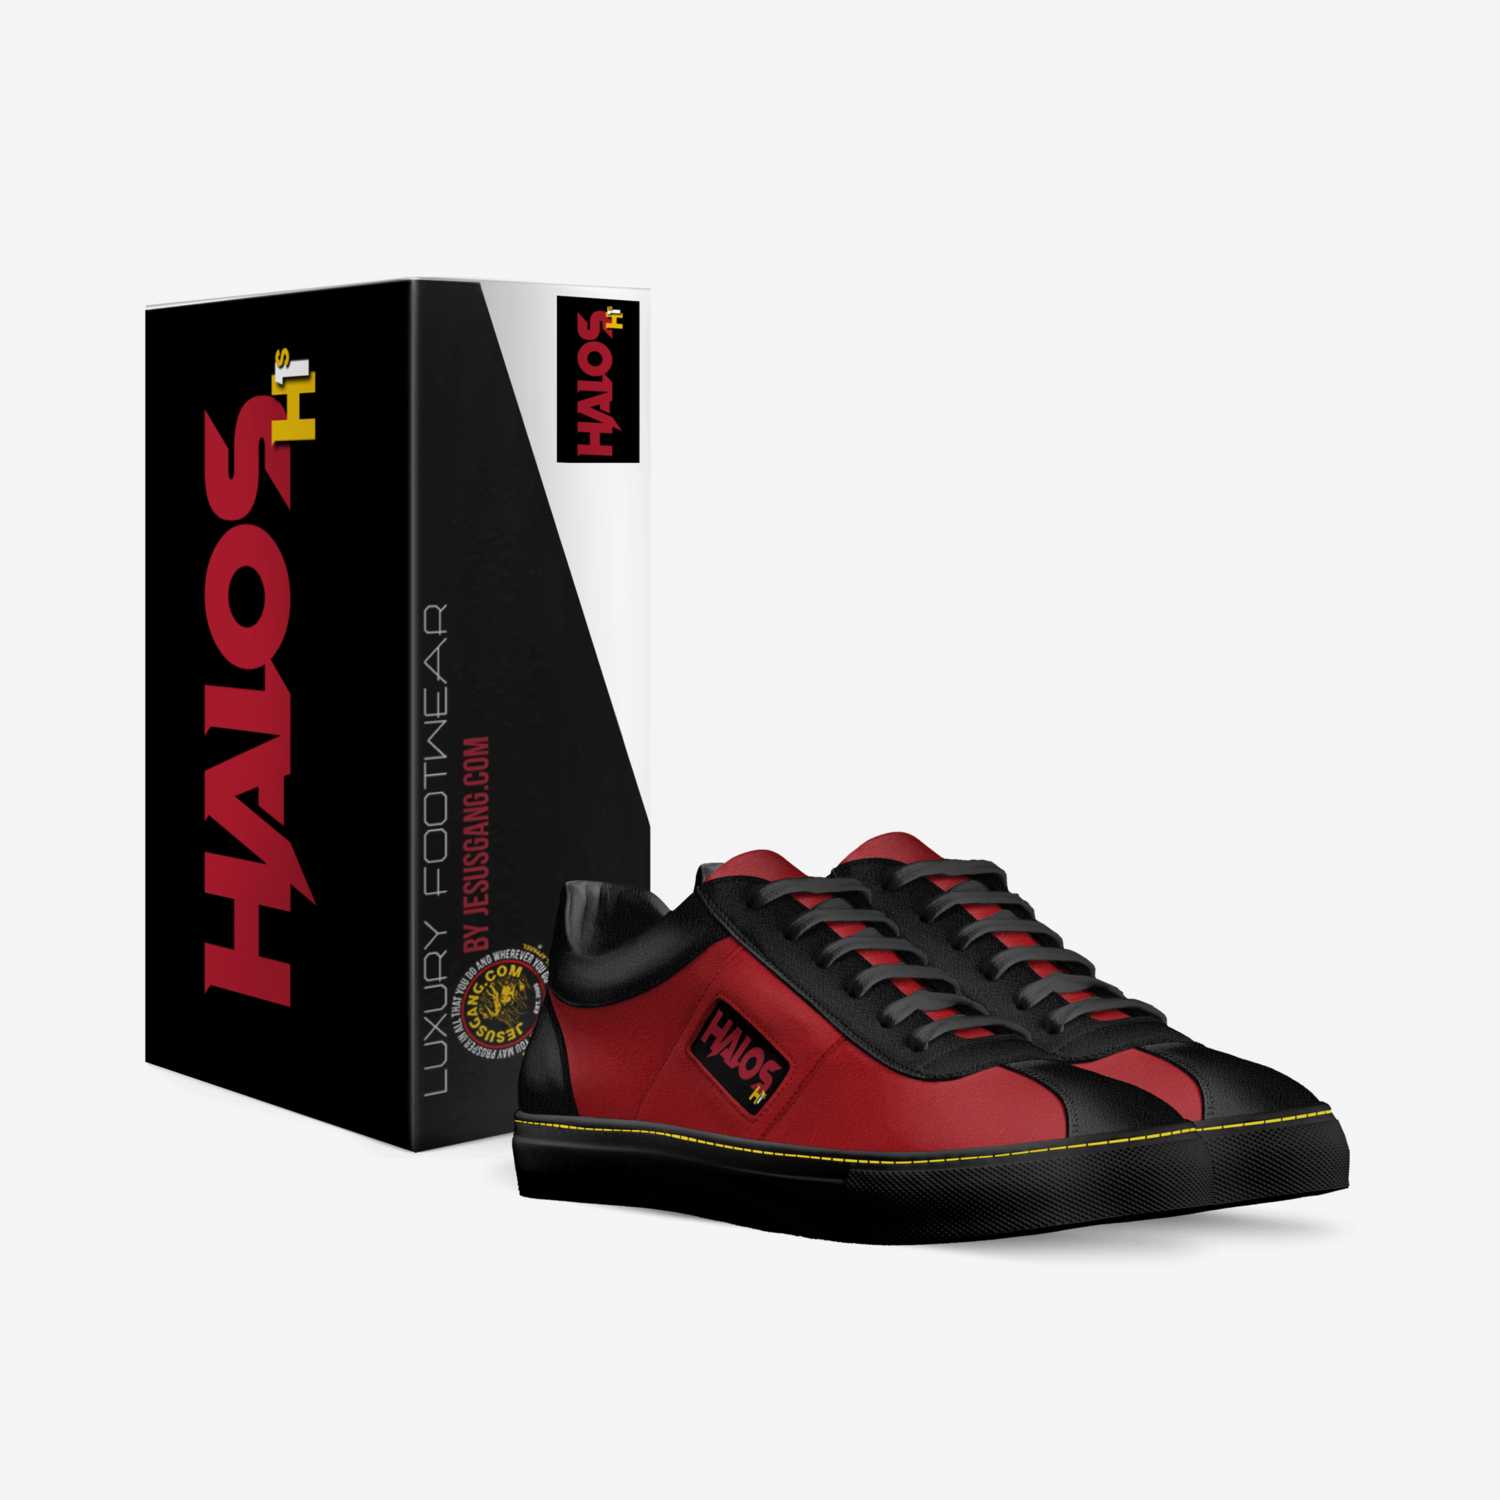 Halos custom made in Italy shoes by Antwan Lewis | Box view